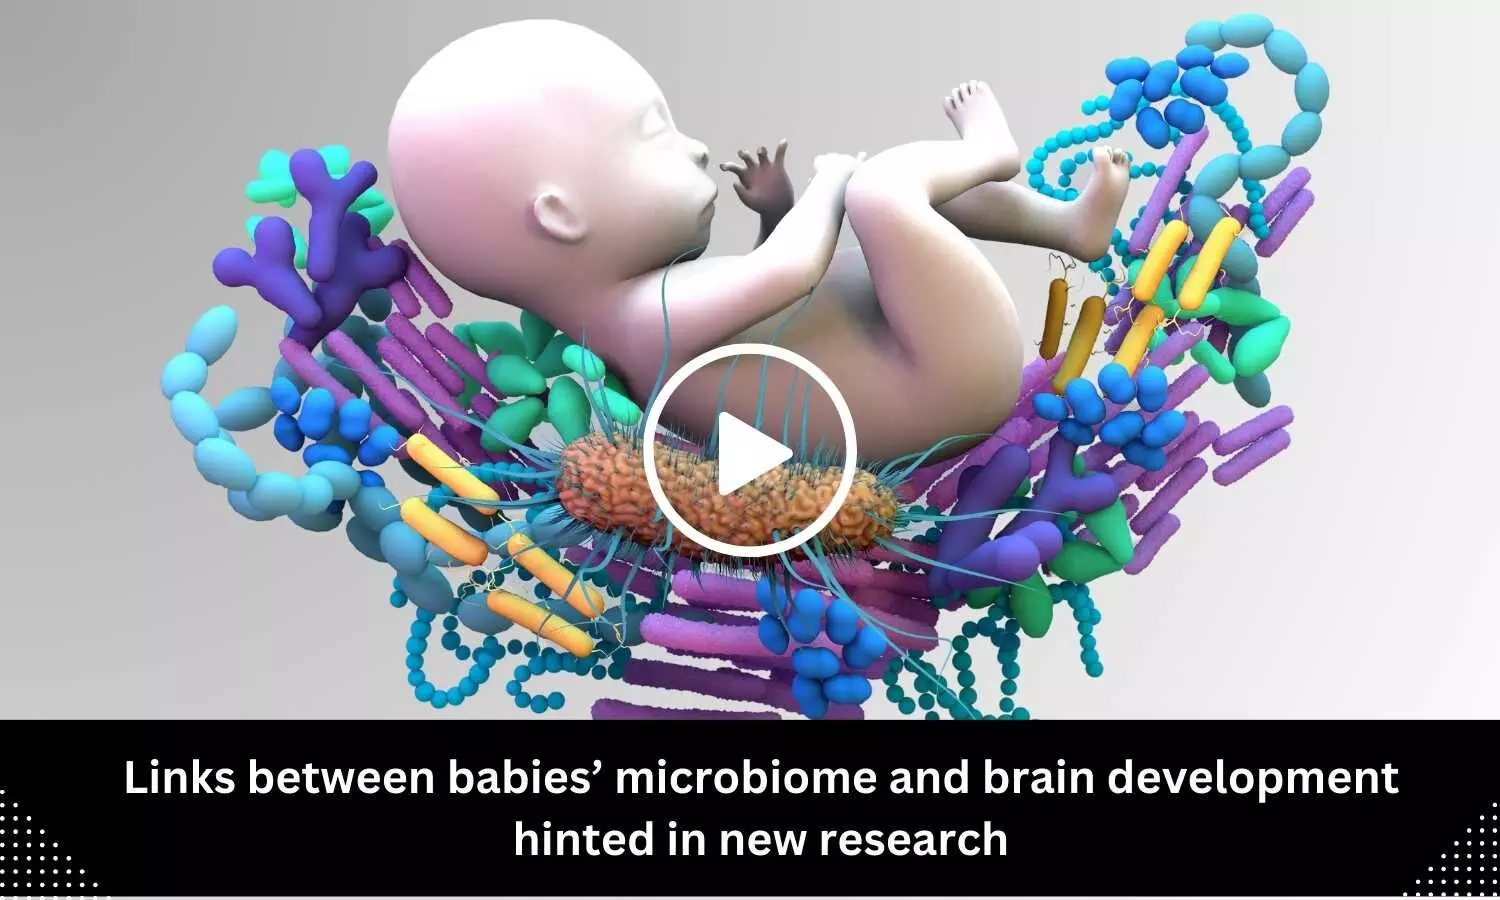 Links between babies microbiome and brain development hinted in new research